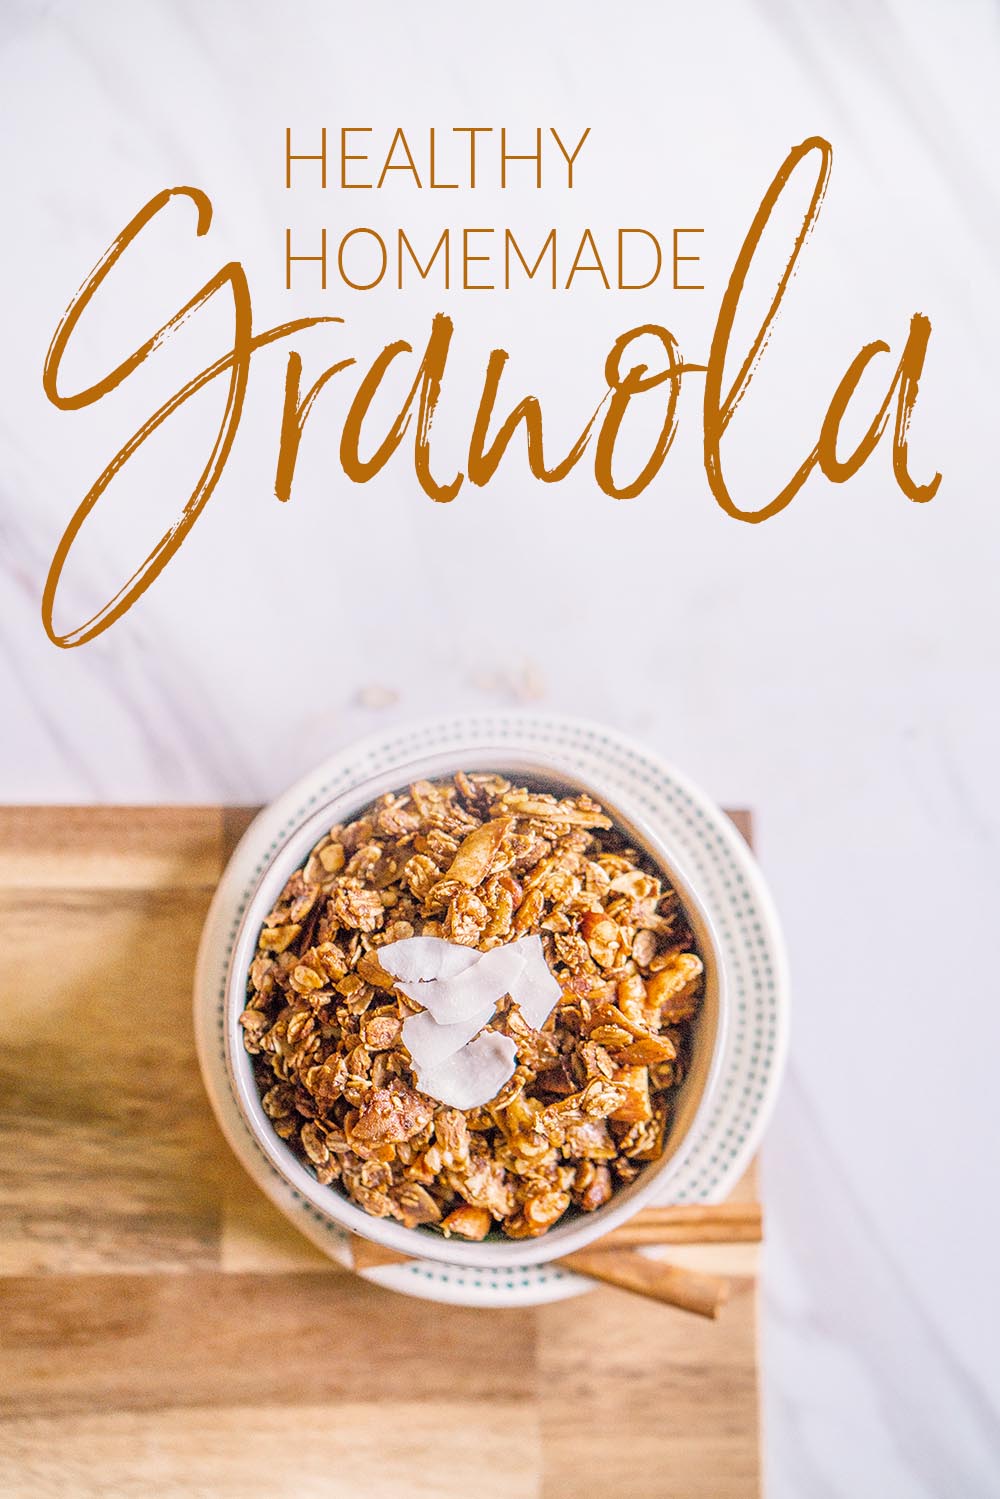 This healthy homemade granola is full of natural nuts and grains that are tasty and good for you!